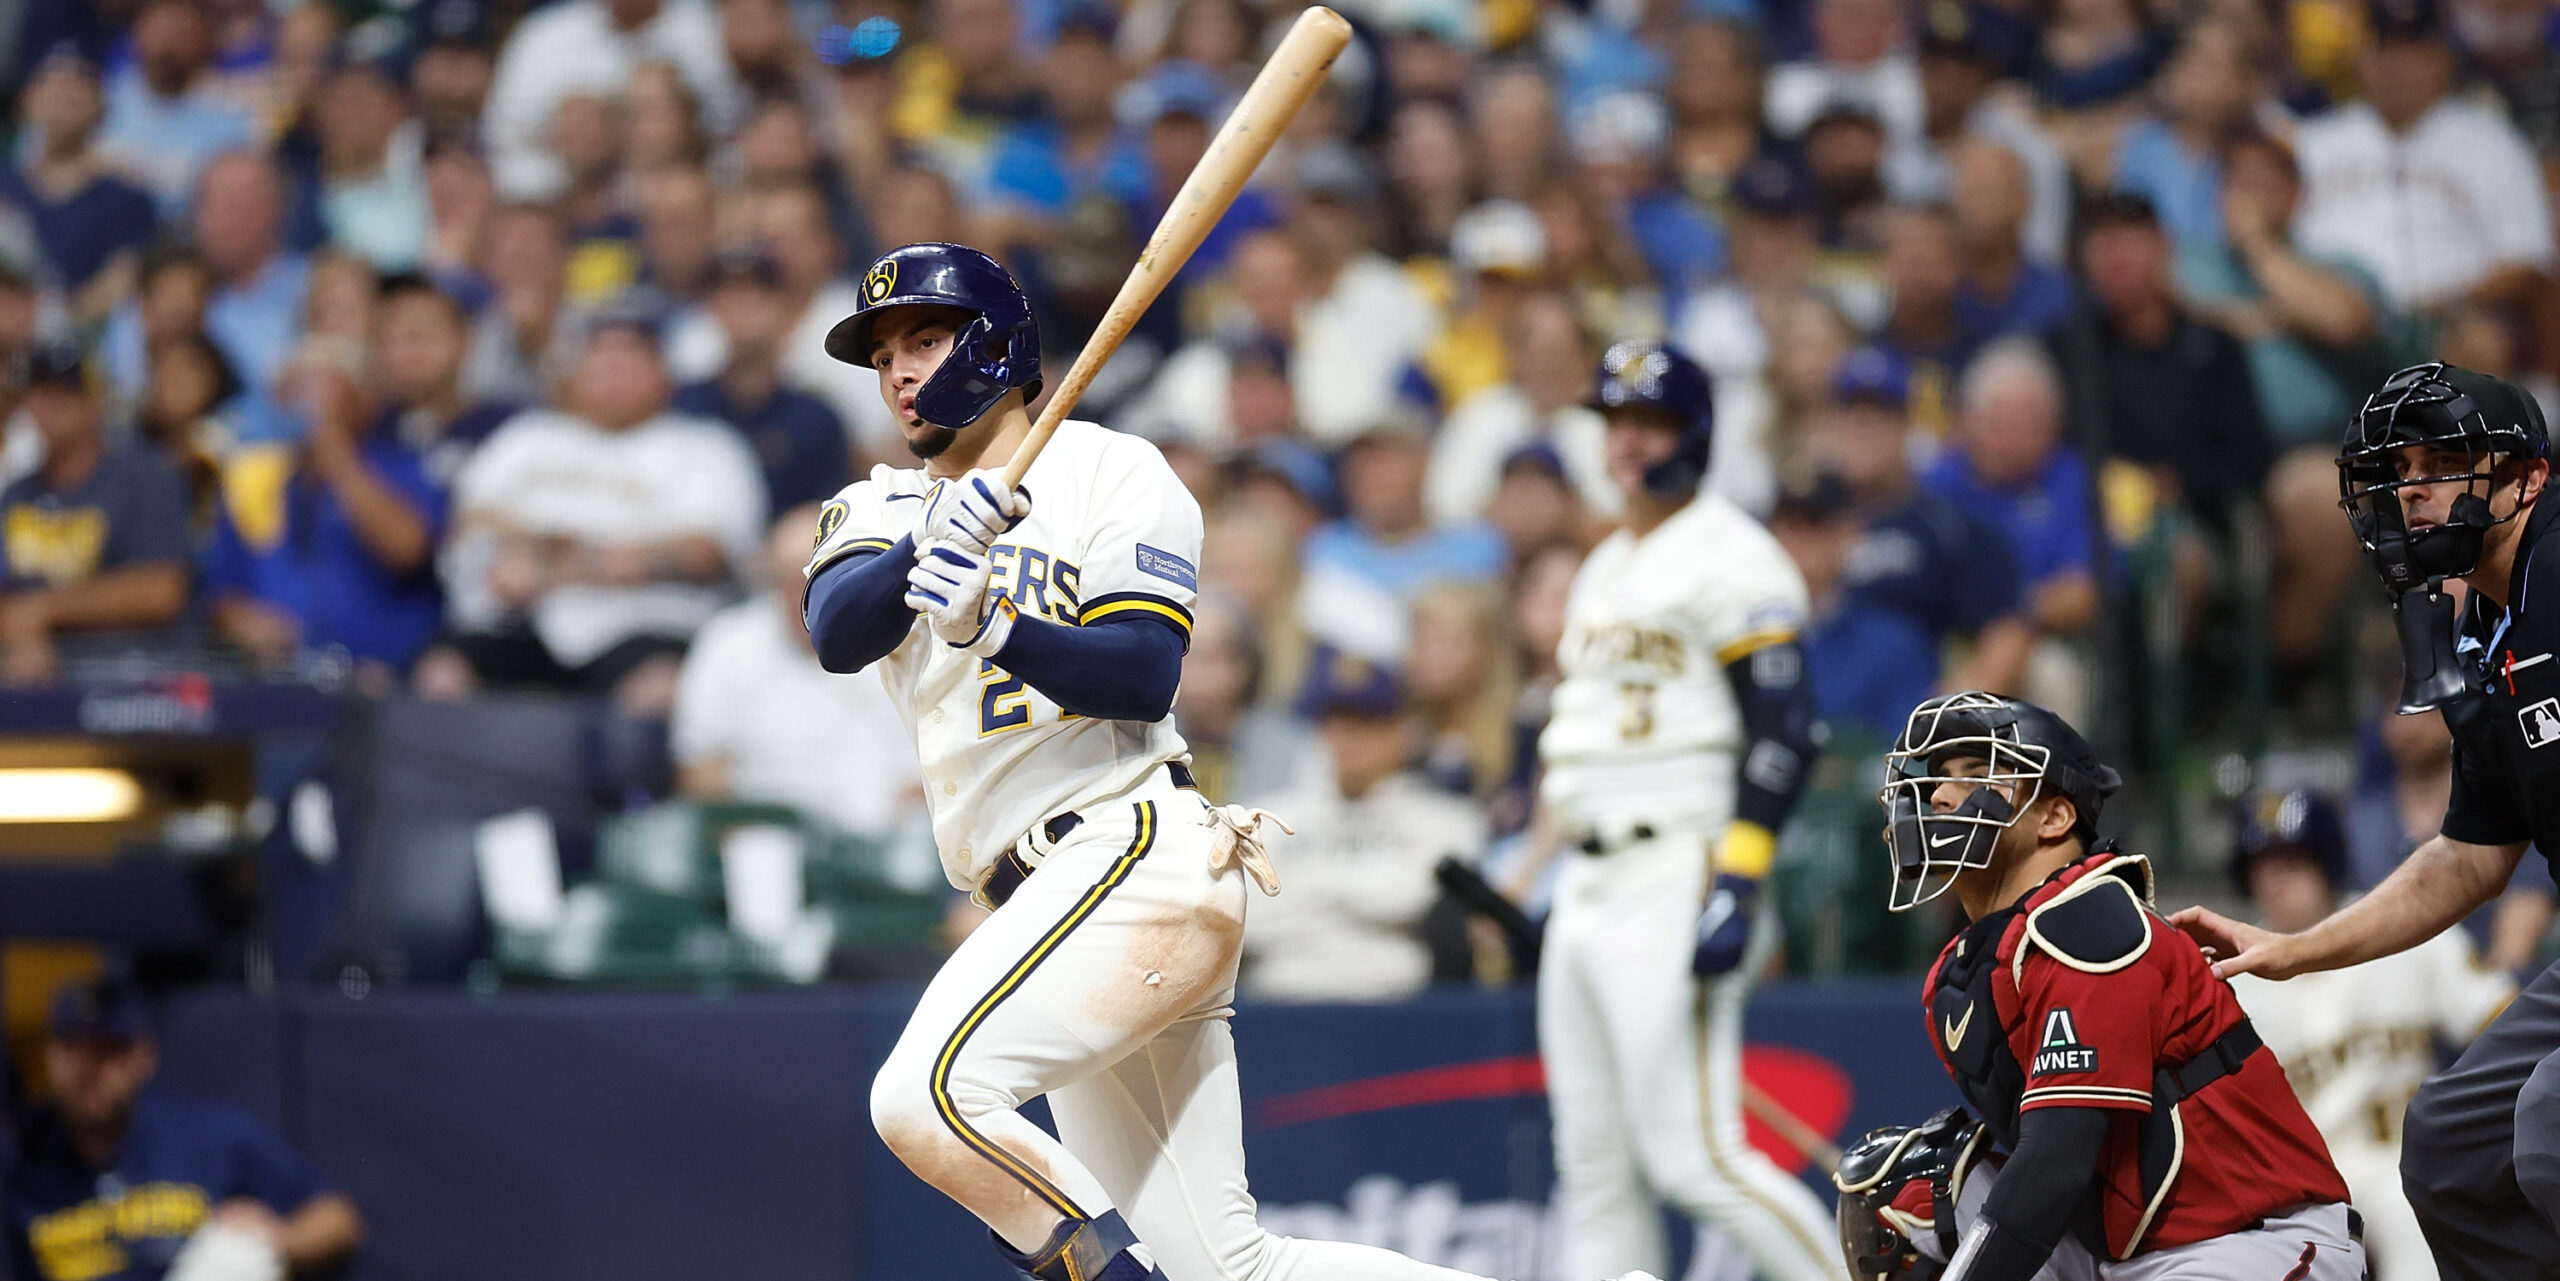 Willie Adams’ fastball follies and the future of the Brewers’ lineup